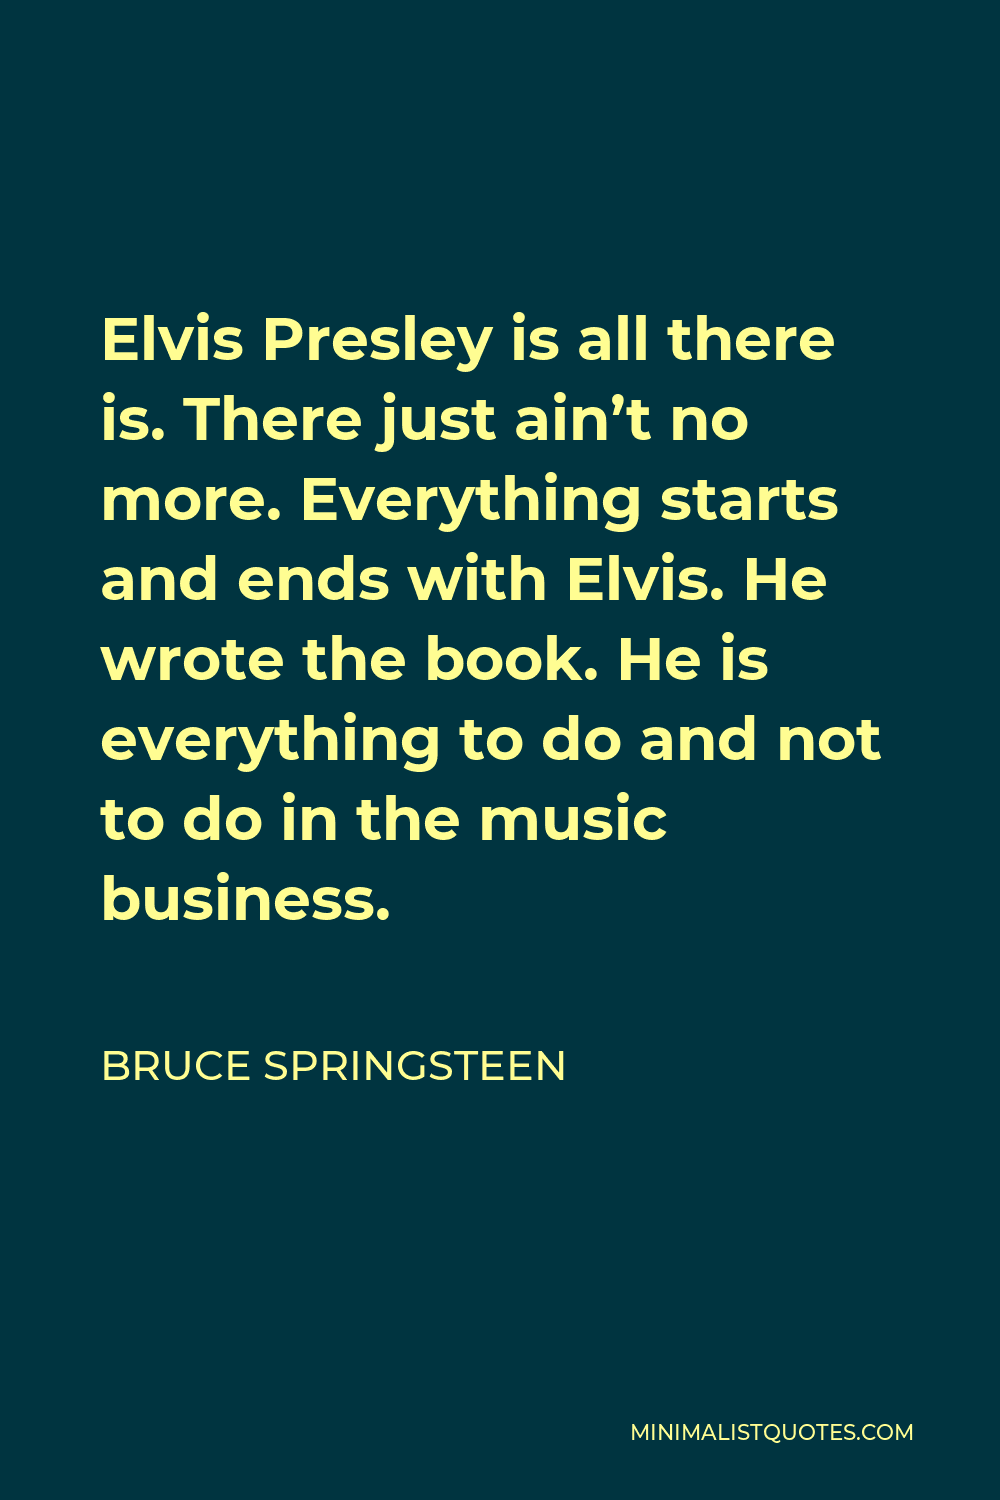 Bruce Springsteen Quote - Elvis Presley is all there is. There just ain’t no more. Everything starts and ends with Elvis. He wrote the book. He is everything to do and not to do in the music business.